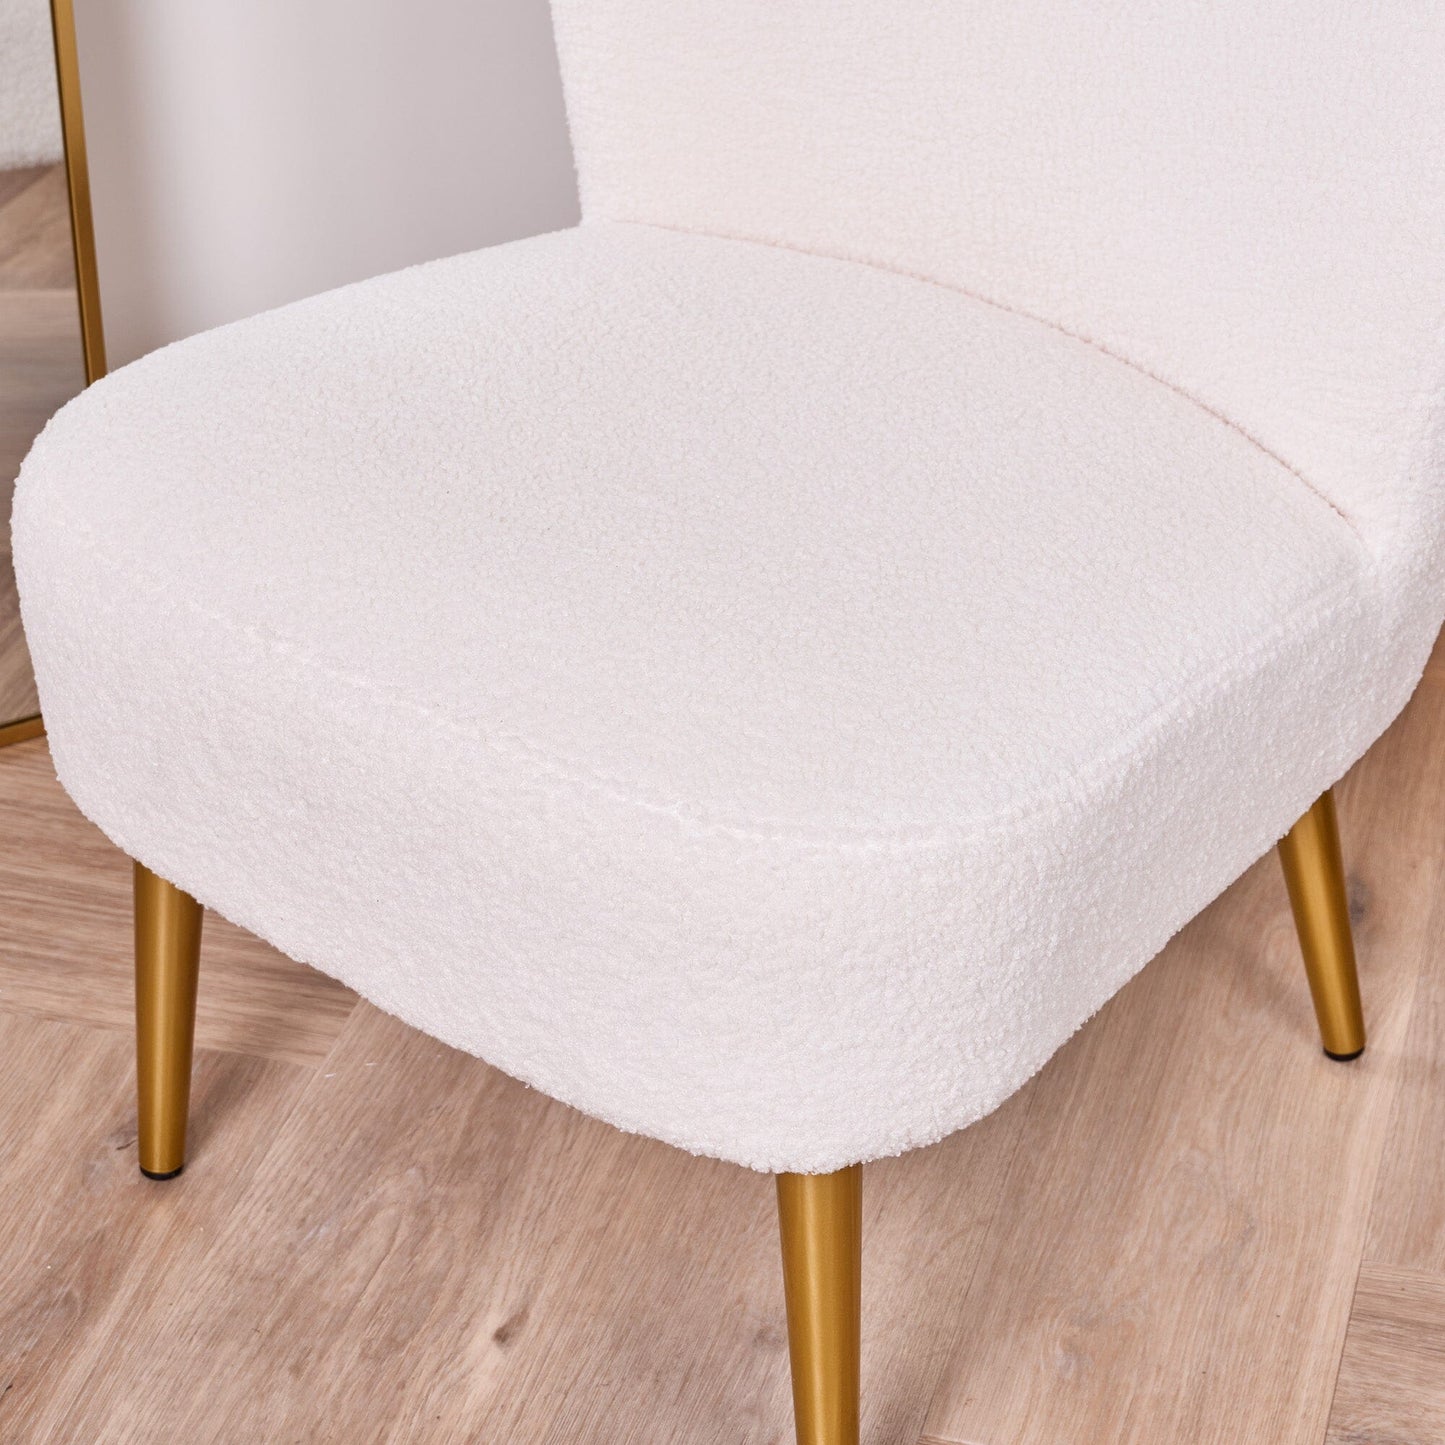 Hattie accent chair - cream boucle with gold legs